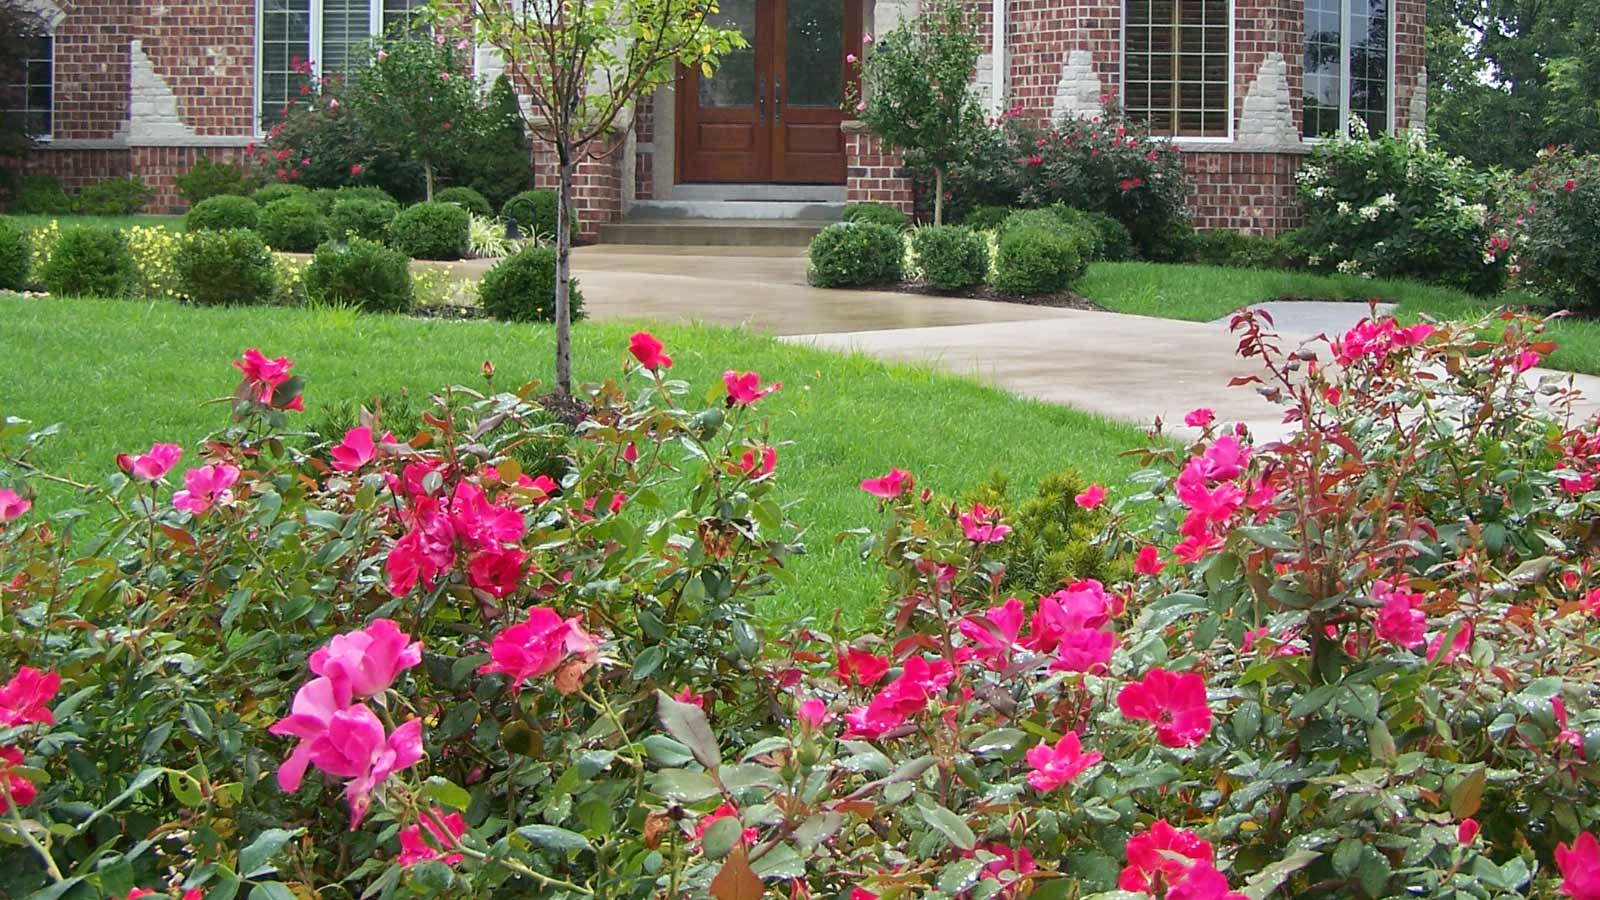 The latest projects and helpful tips from SFP Landscaping